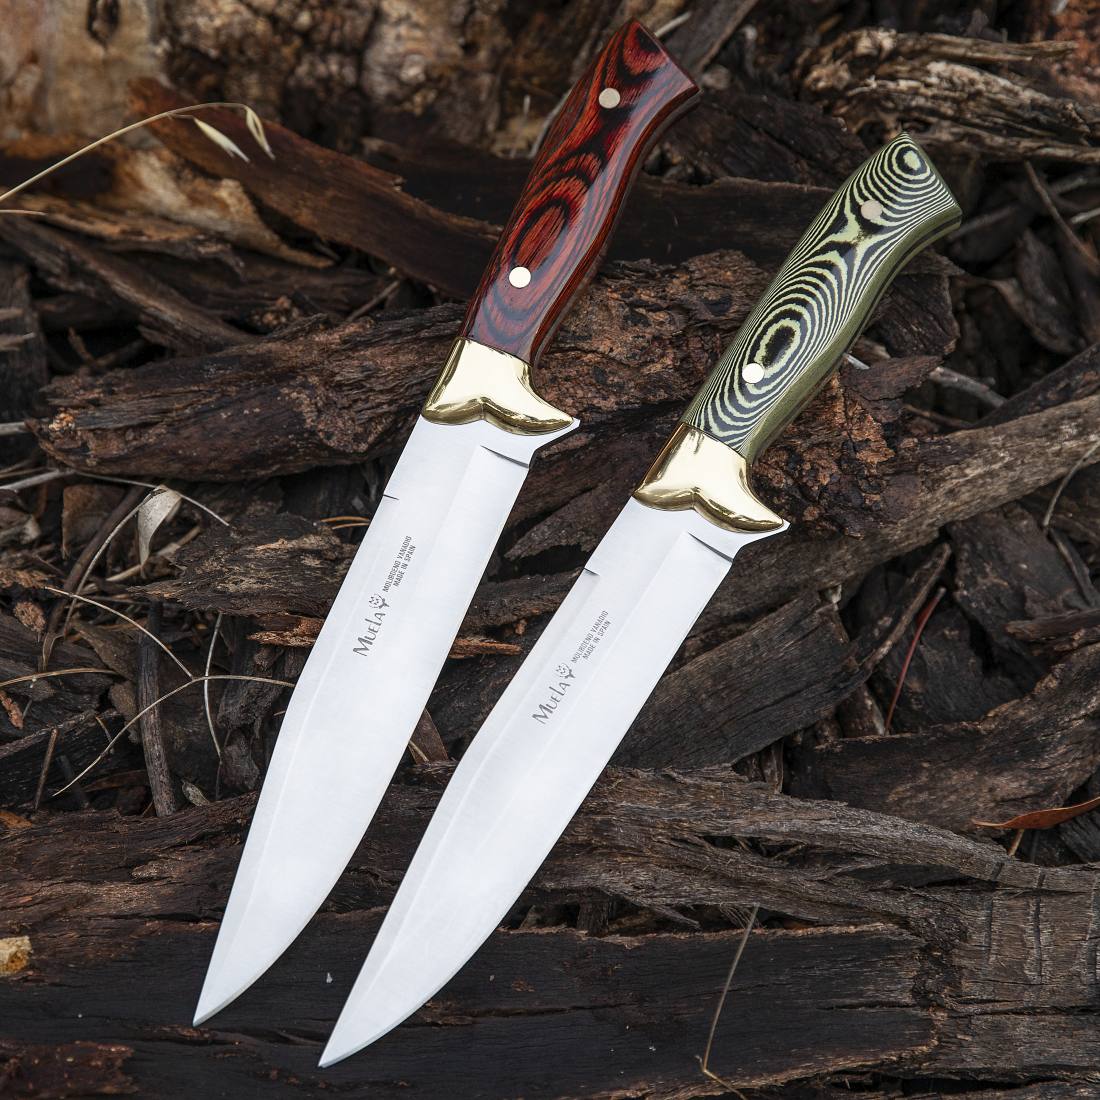 Reissue of the Combate-K and Combate-K.G knives